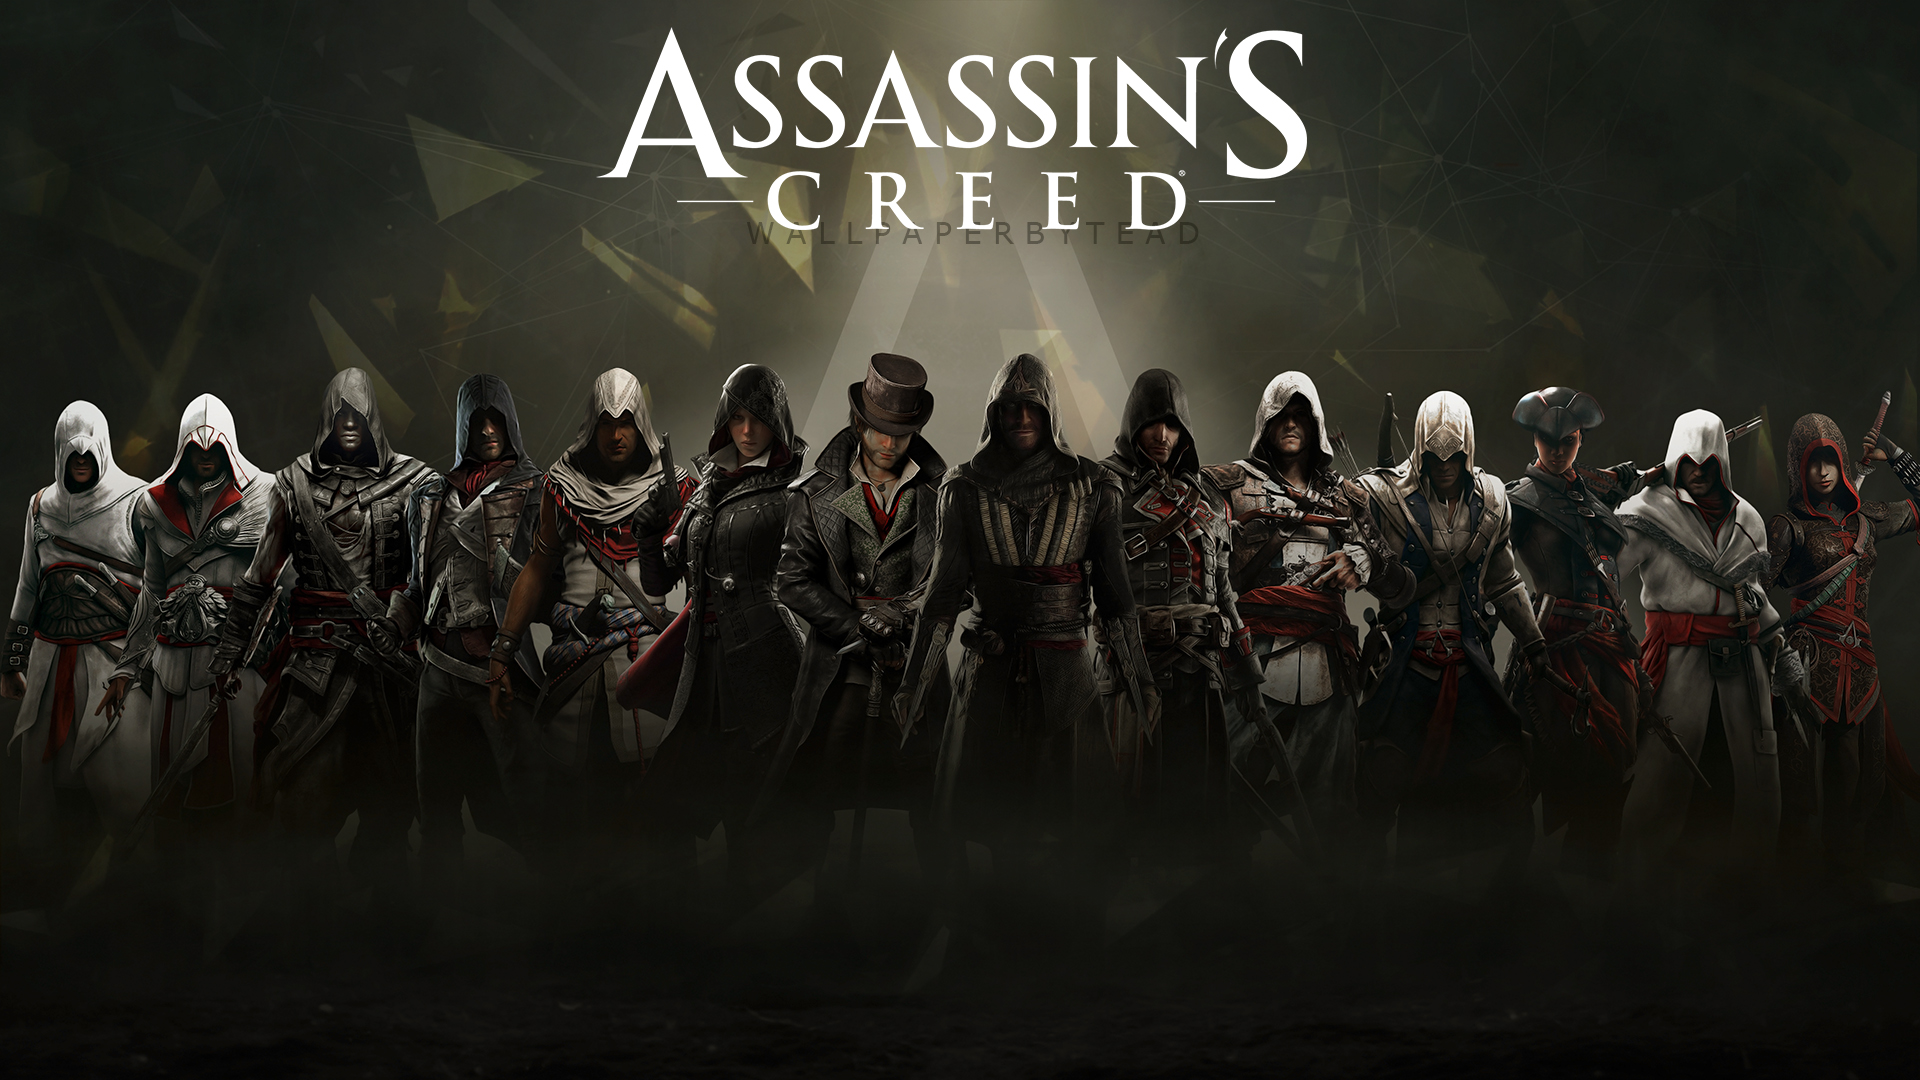 Assassin's Creed HD Wallpapers